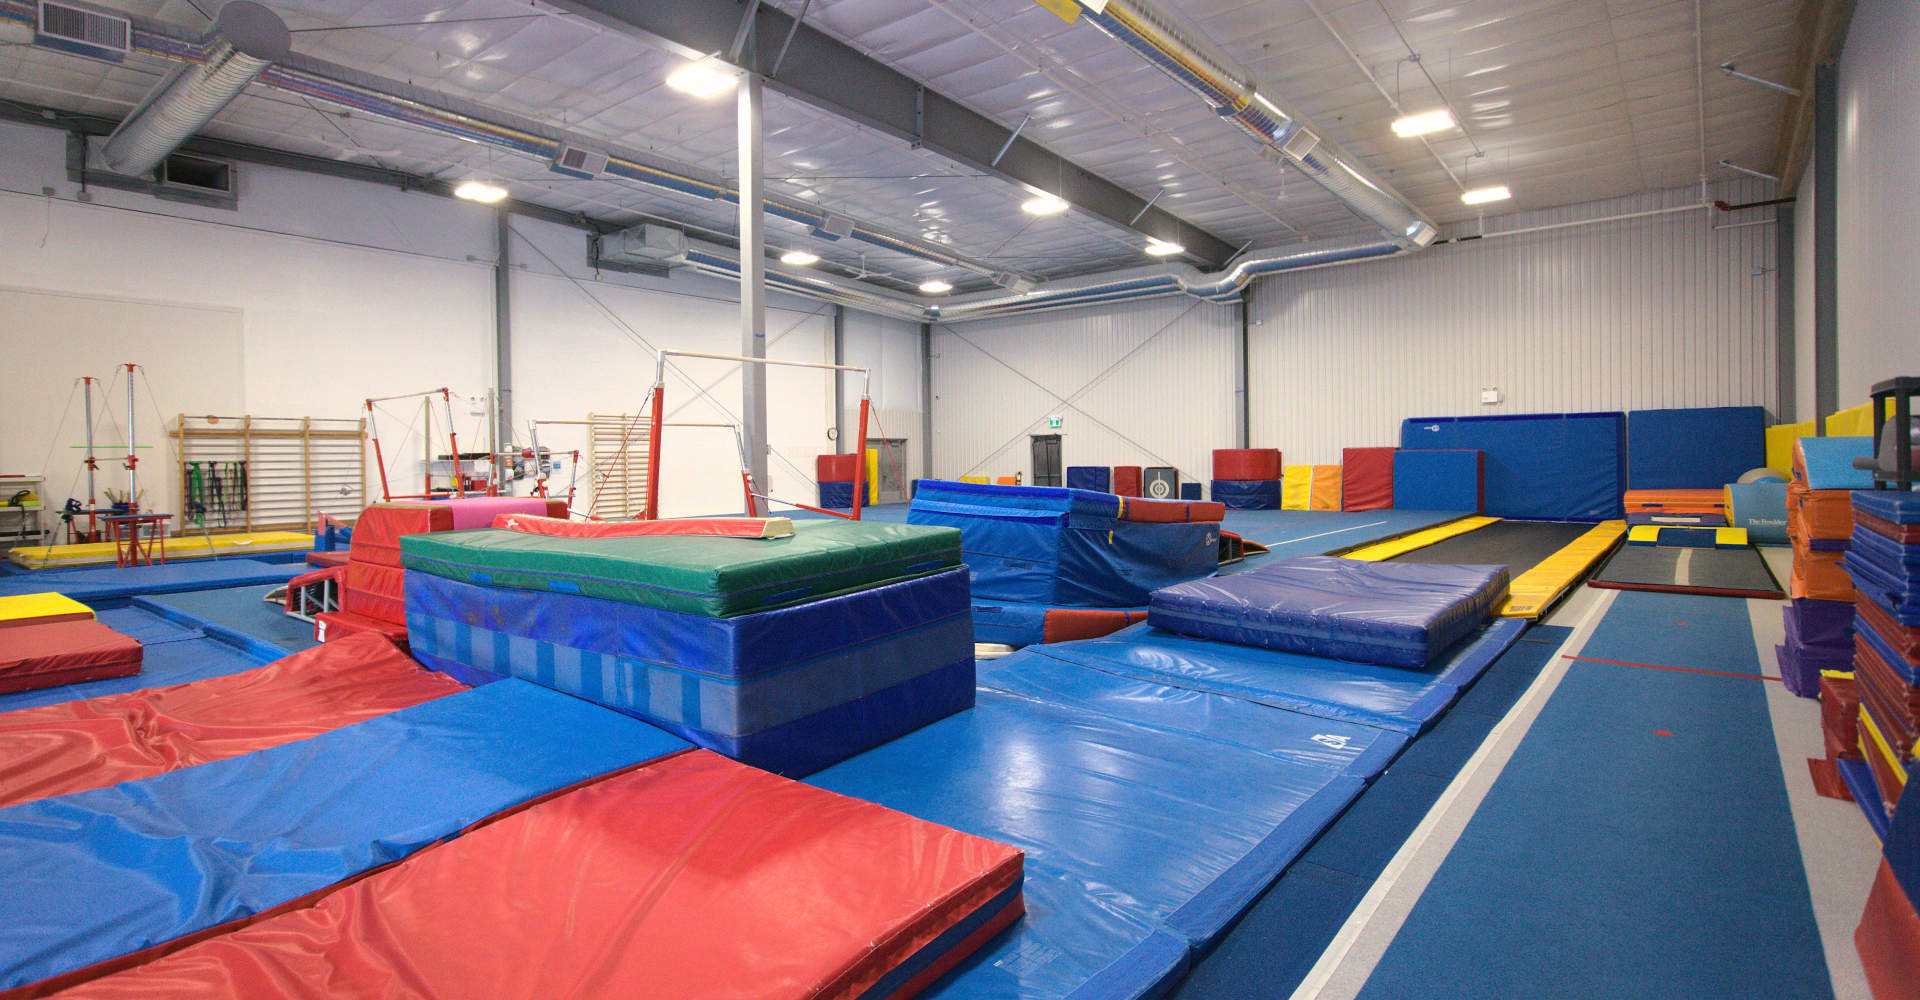 Gymworld Gymnastics Facility in Northwest London: Professional Equipment, Mats, Balance Beams, Adjustable Bars and More. Supportive Training Environment for Youth in London and region.